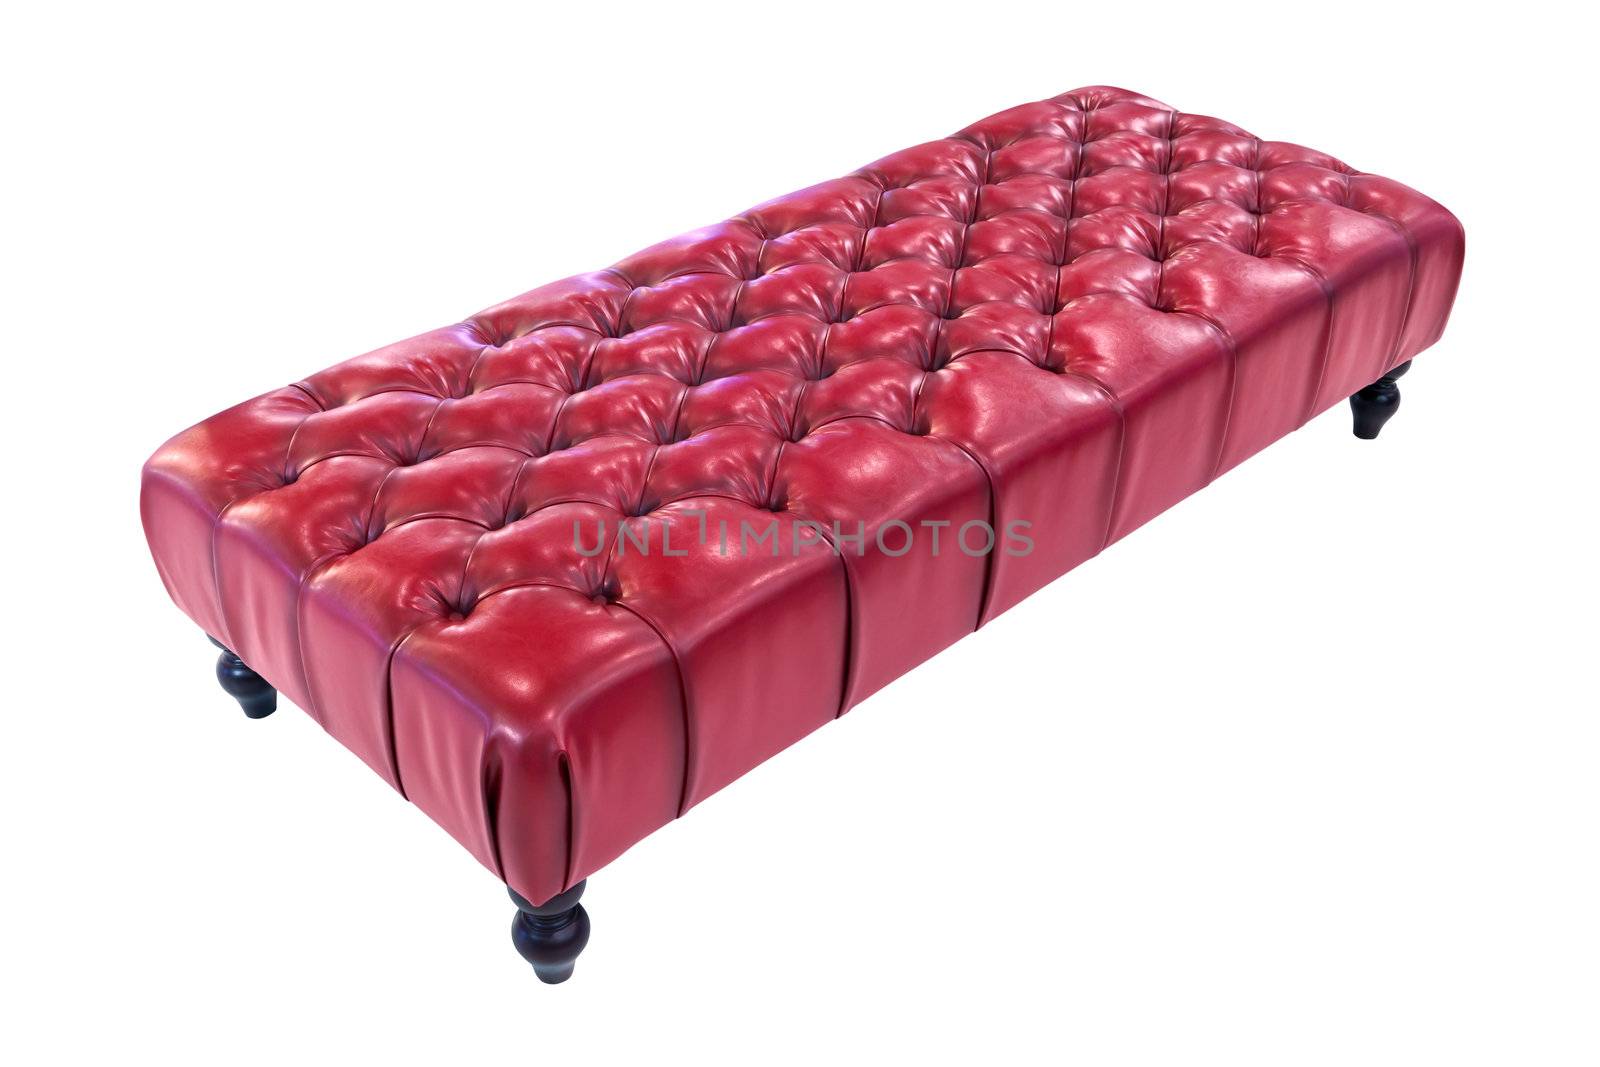 red luxury sofa isolated with clipping path by tungphoto